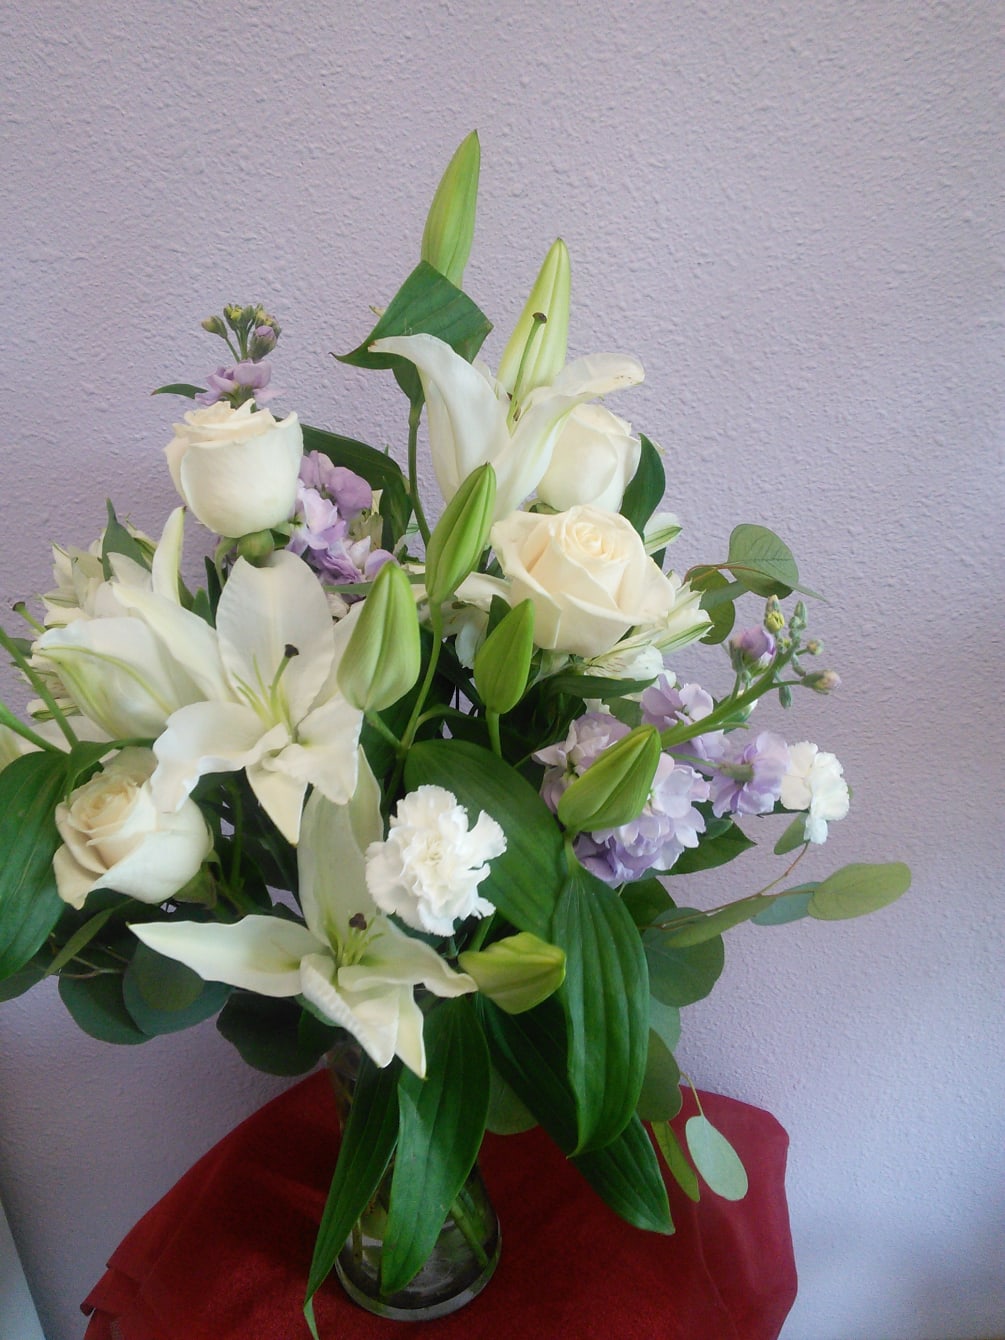 White roses, white lilies and lavender stock. 
Medium size clear vase full